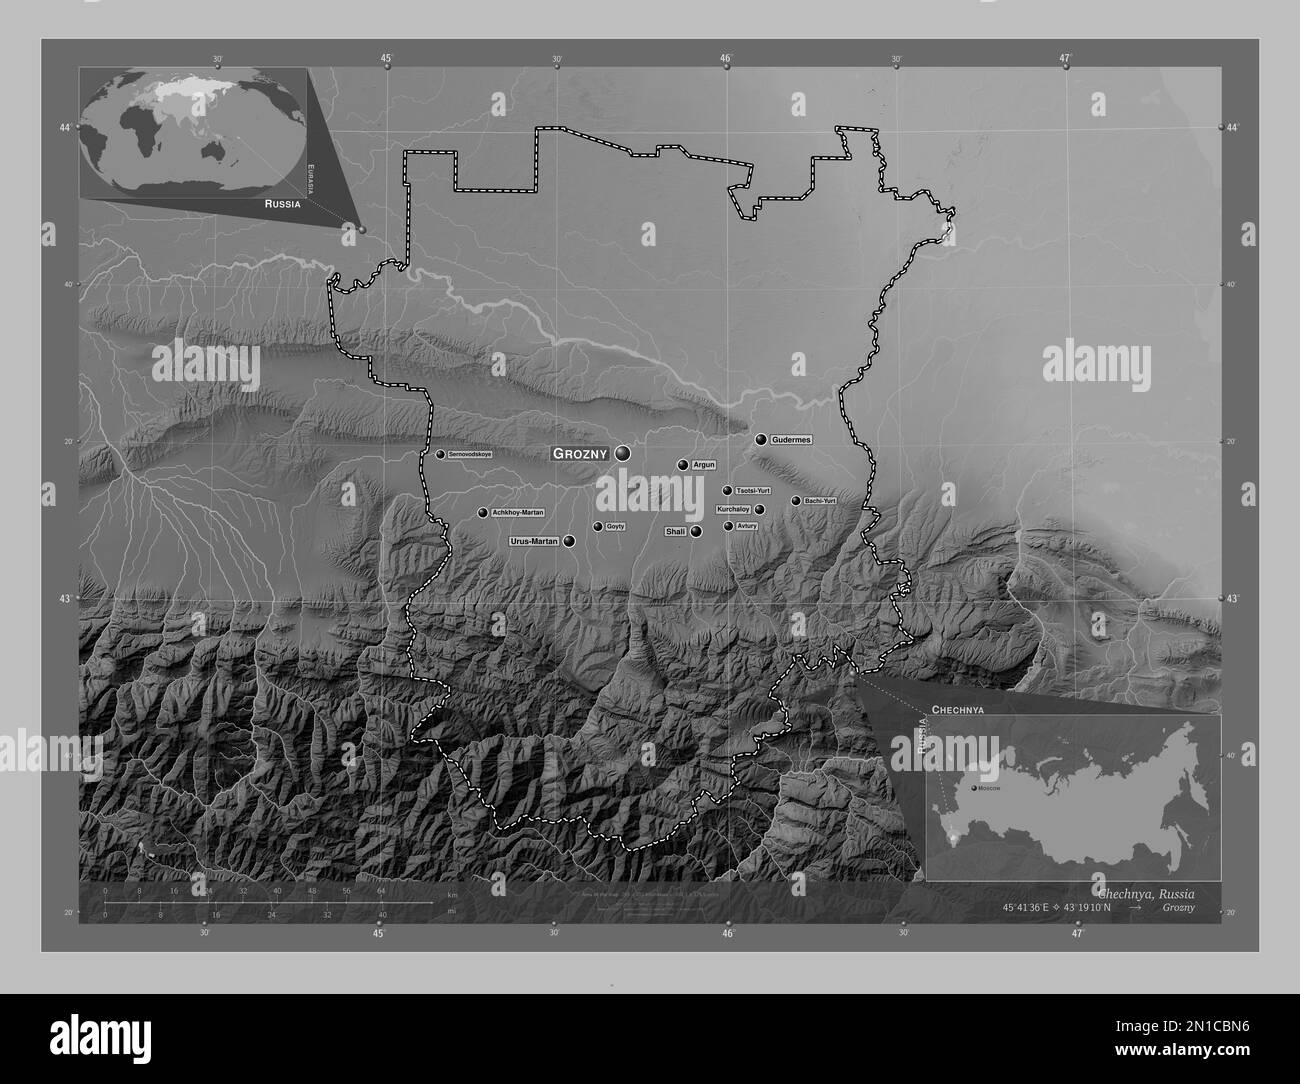 Chechnya, republic of Russia. Grayscale elevation map with lakes and rivers. Locations and names of major cities of the region. Corner auxiliary locat Stock Photo